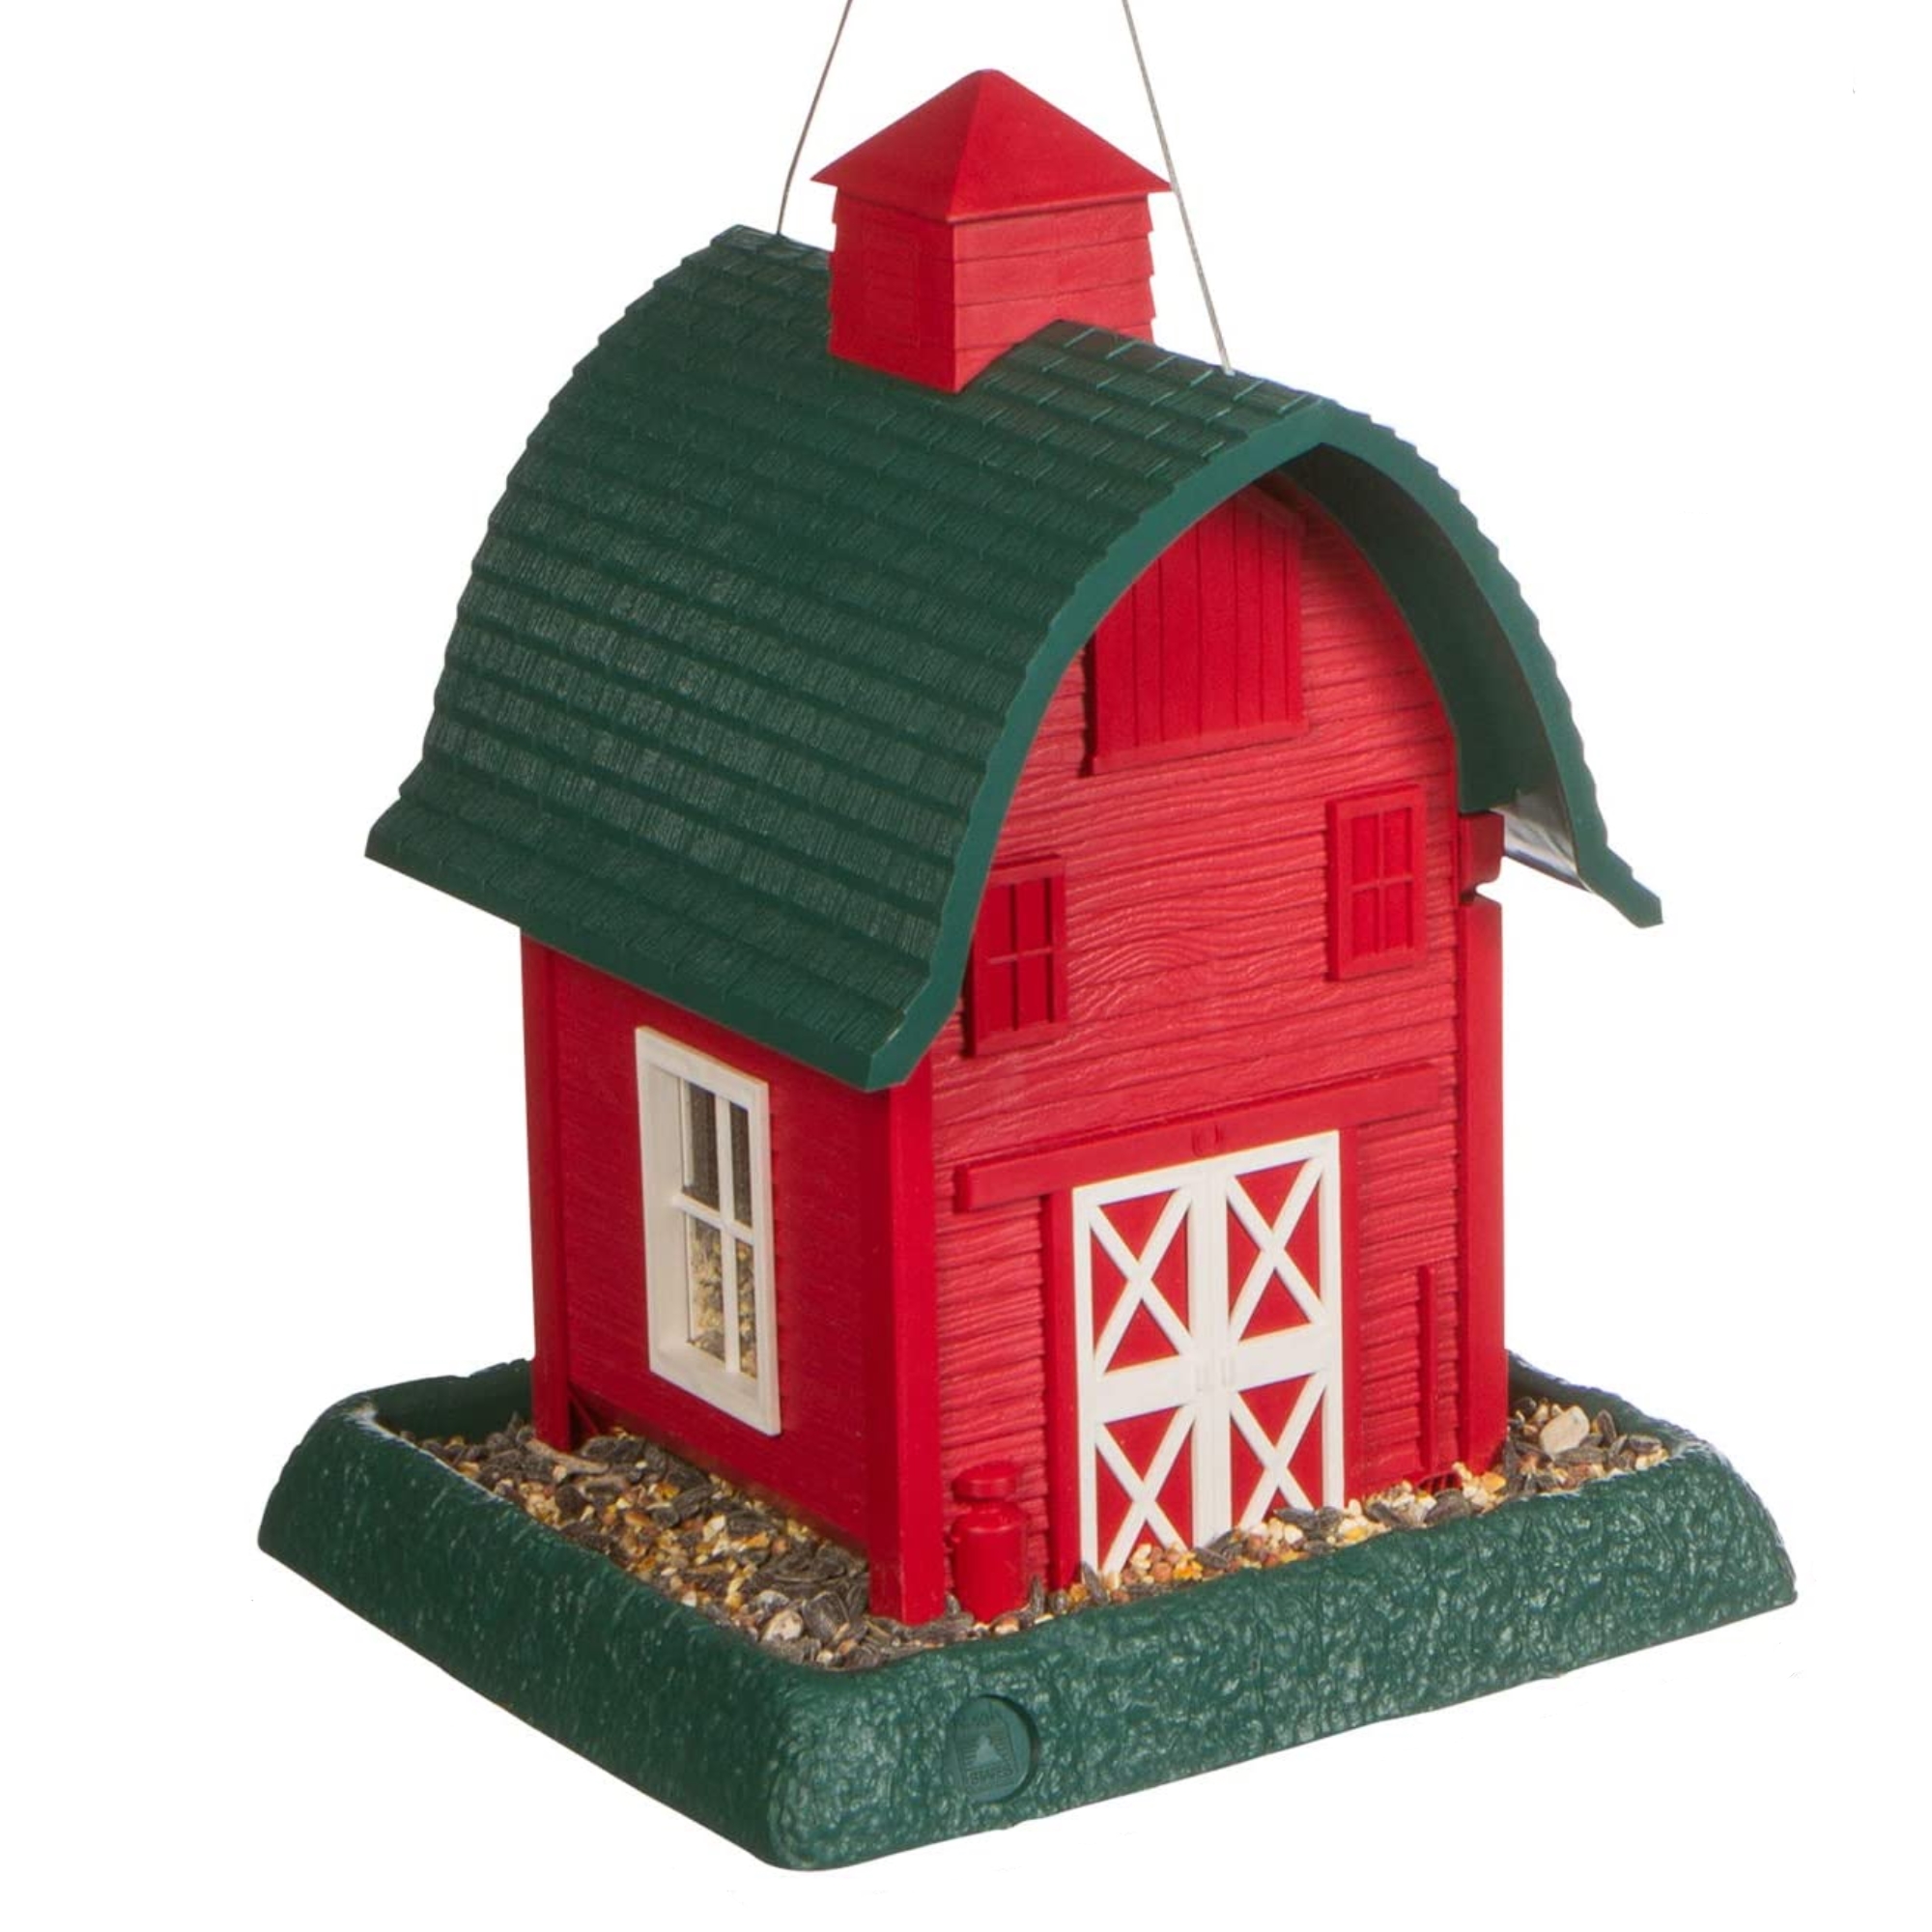 North States Village Collection Red Barn Hopper Bird Feeder, 5 lb. Capacity - image 1 of 10